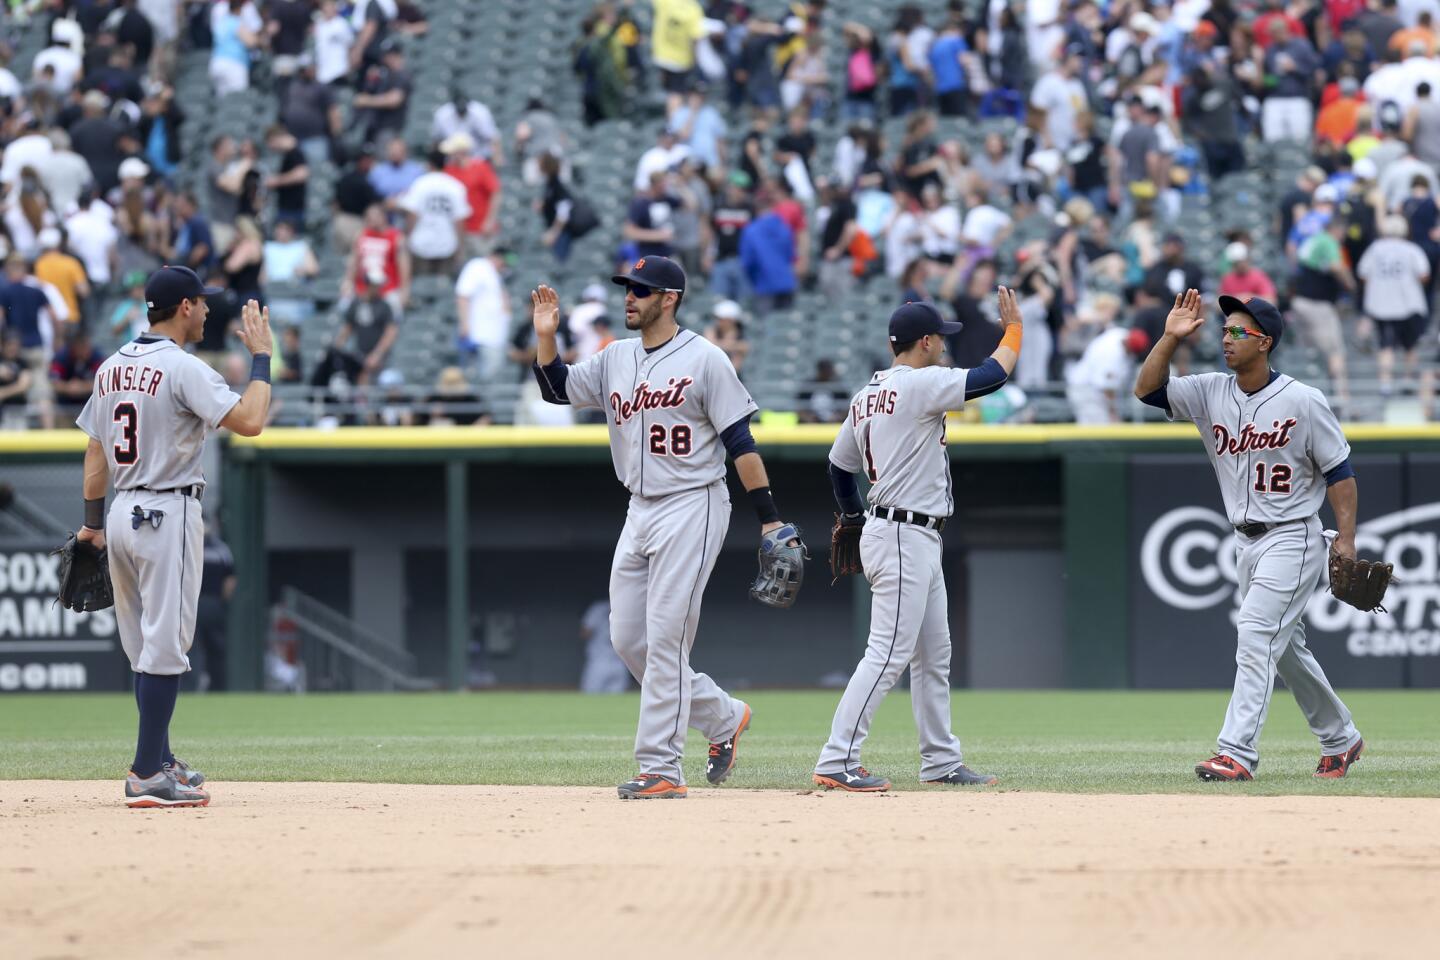 Tigers players celebrate after defeating the White Sox.